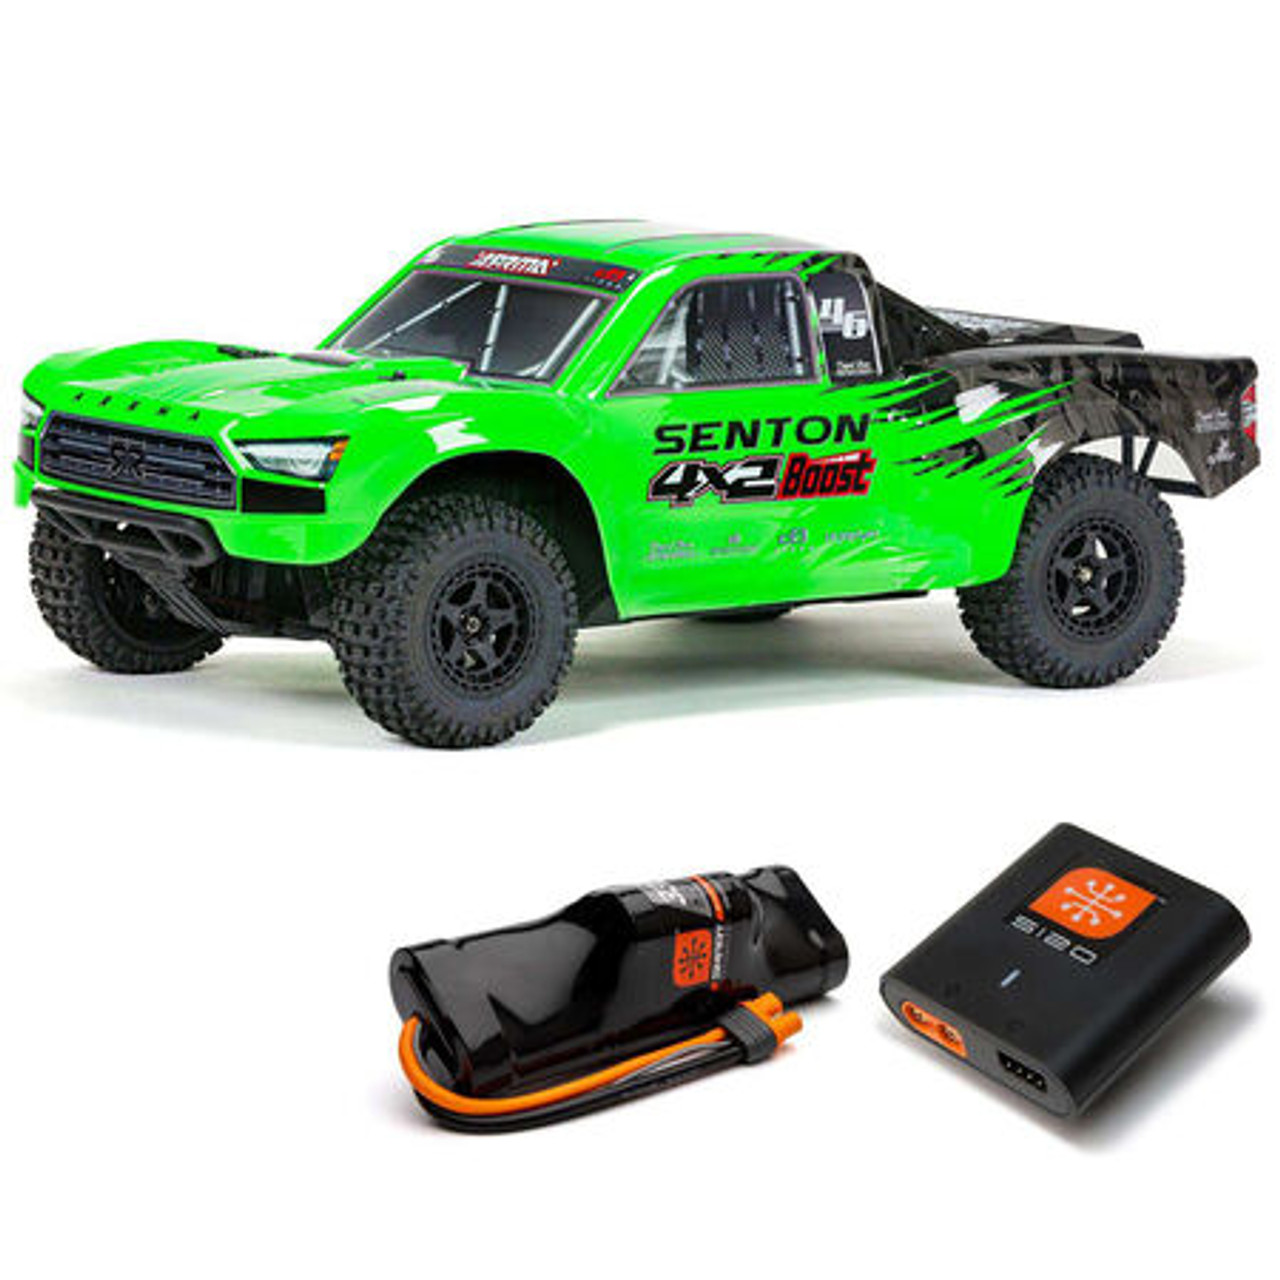 ARRMA 1/10 SENTON 4X2 BOOST MEGA 550 Brushed Short Course Truck RTR with Battery & Charger, Green ARA4103SV4T1